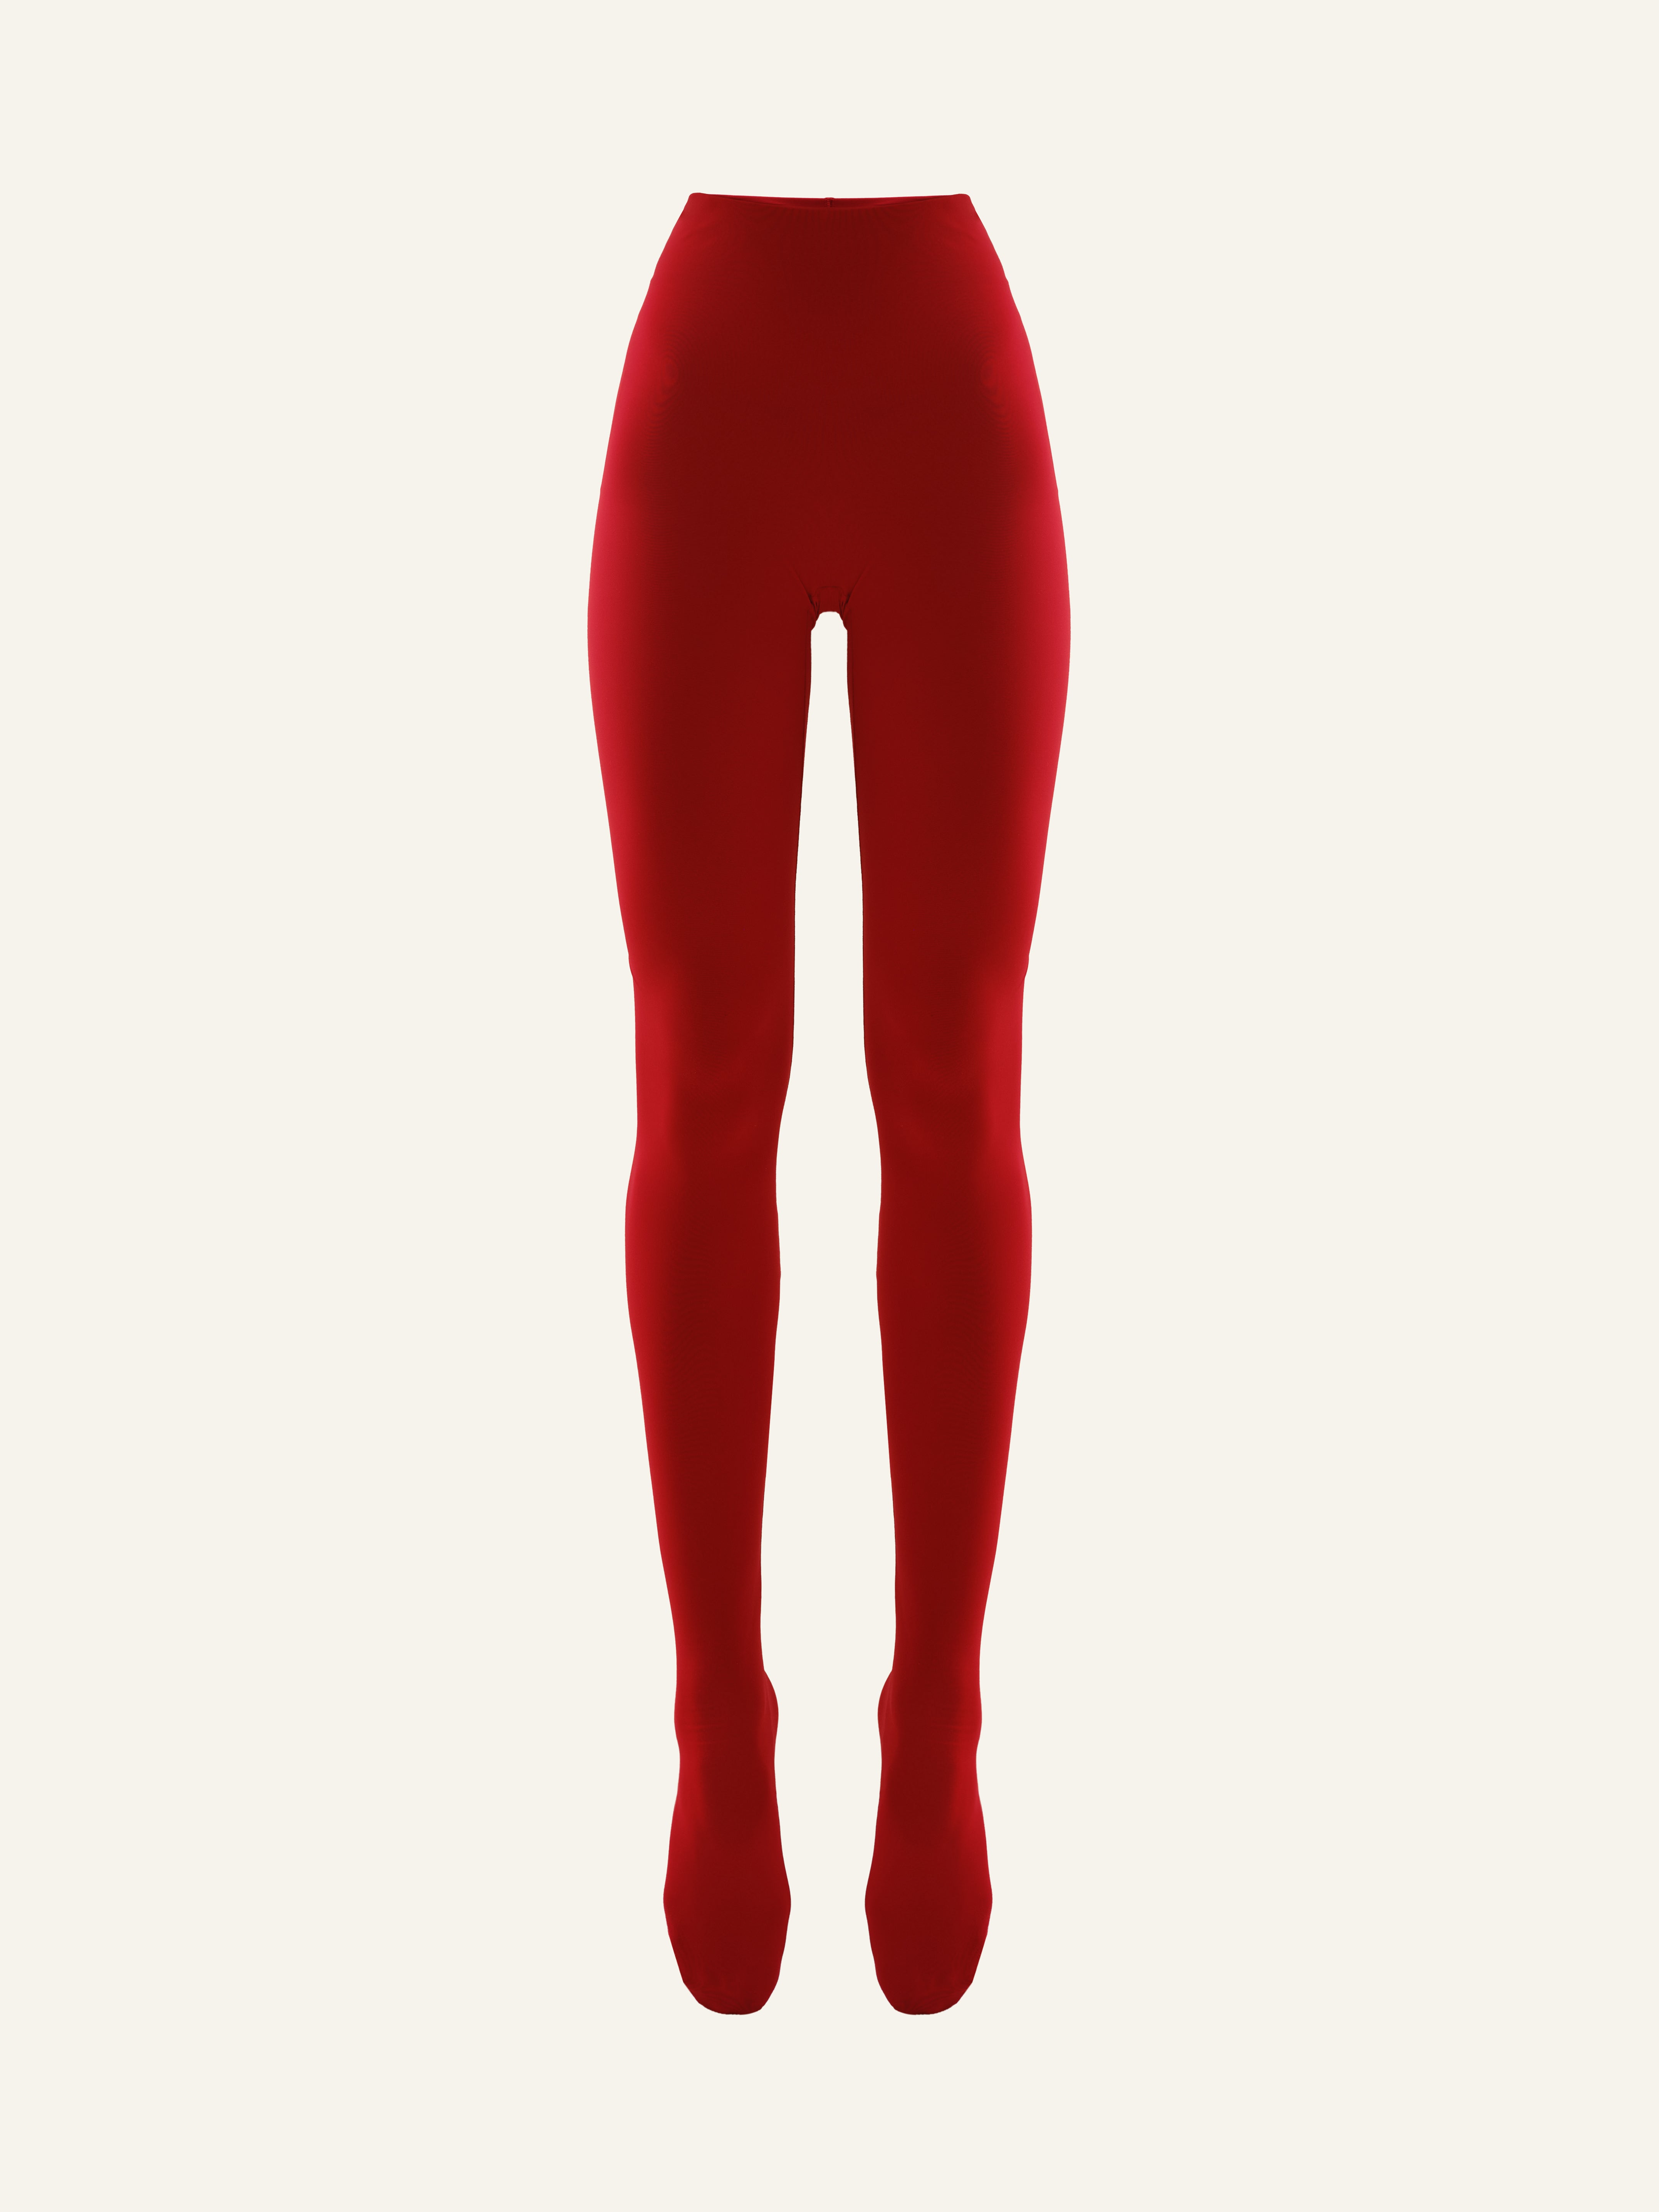 Product photo of red regenerated plastic high rise leggings